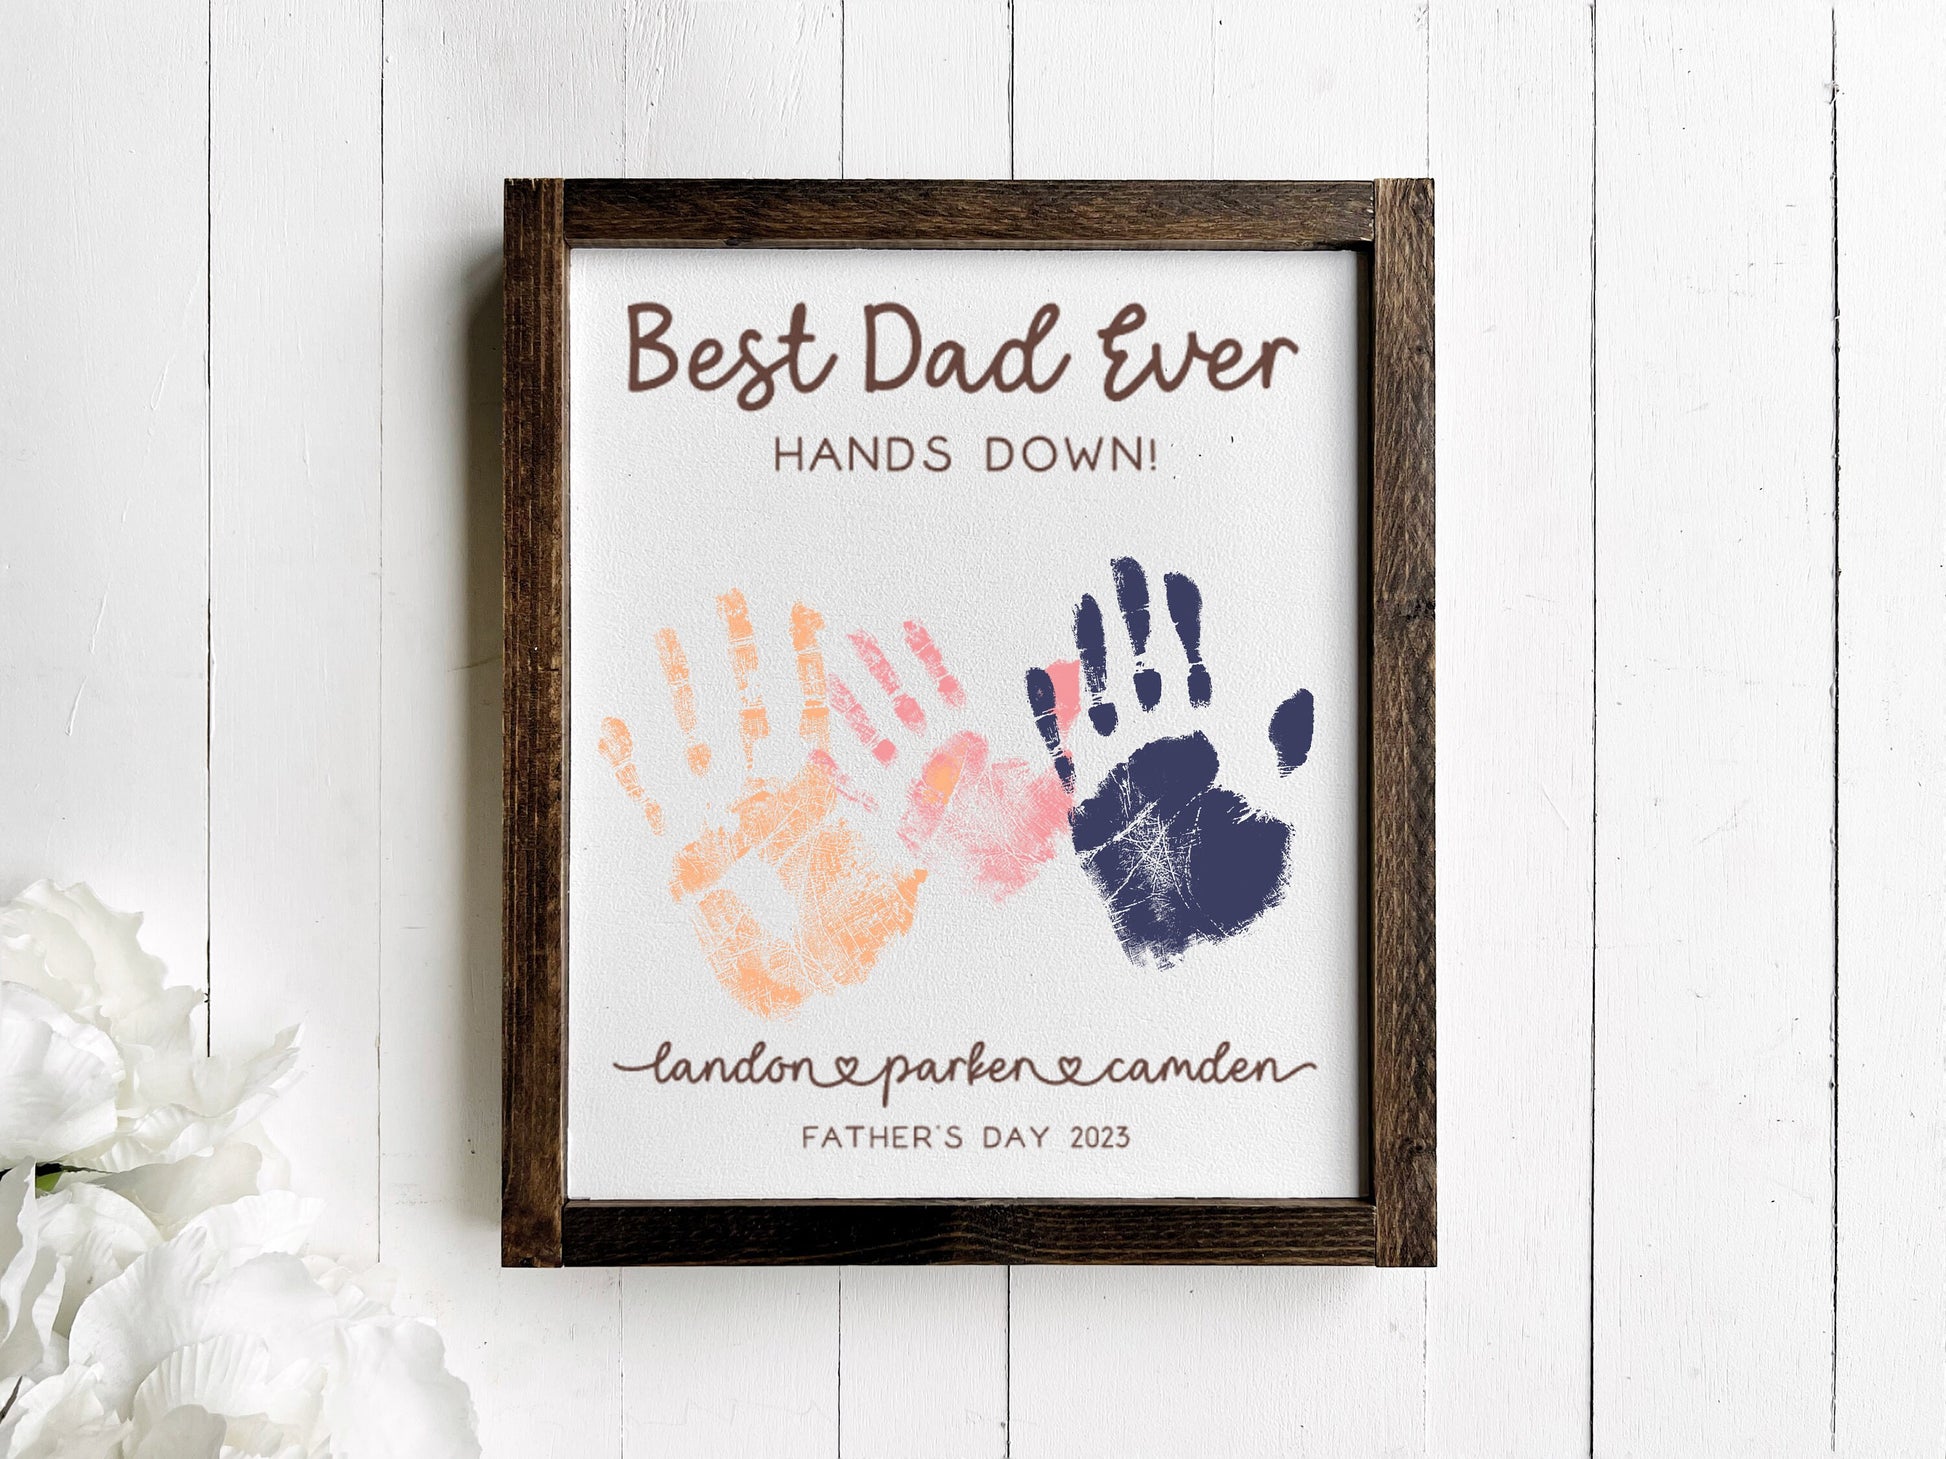 Handprint Sign for Dad, Custom Fathers Day Gift from Kids, Best Dad Ever Hands Down Sign